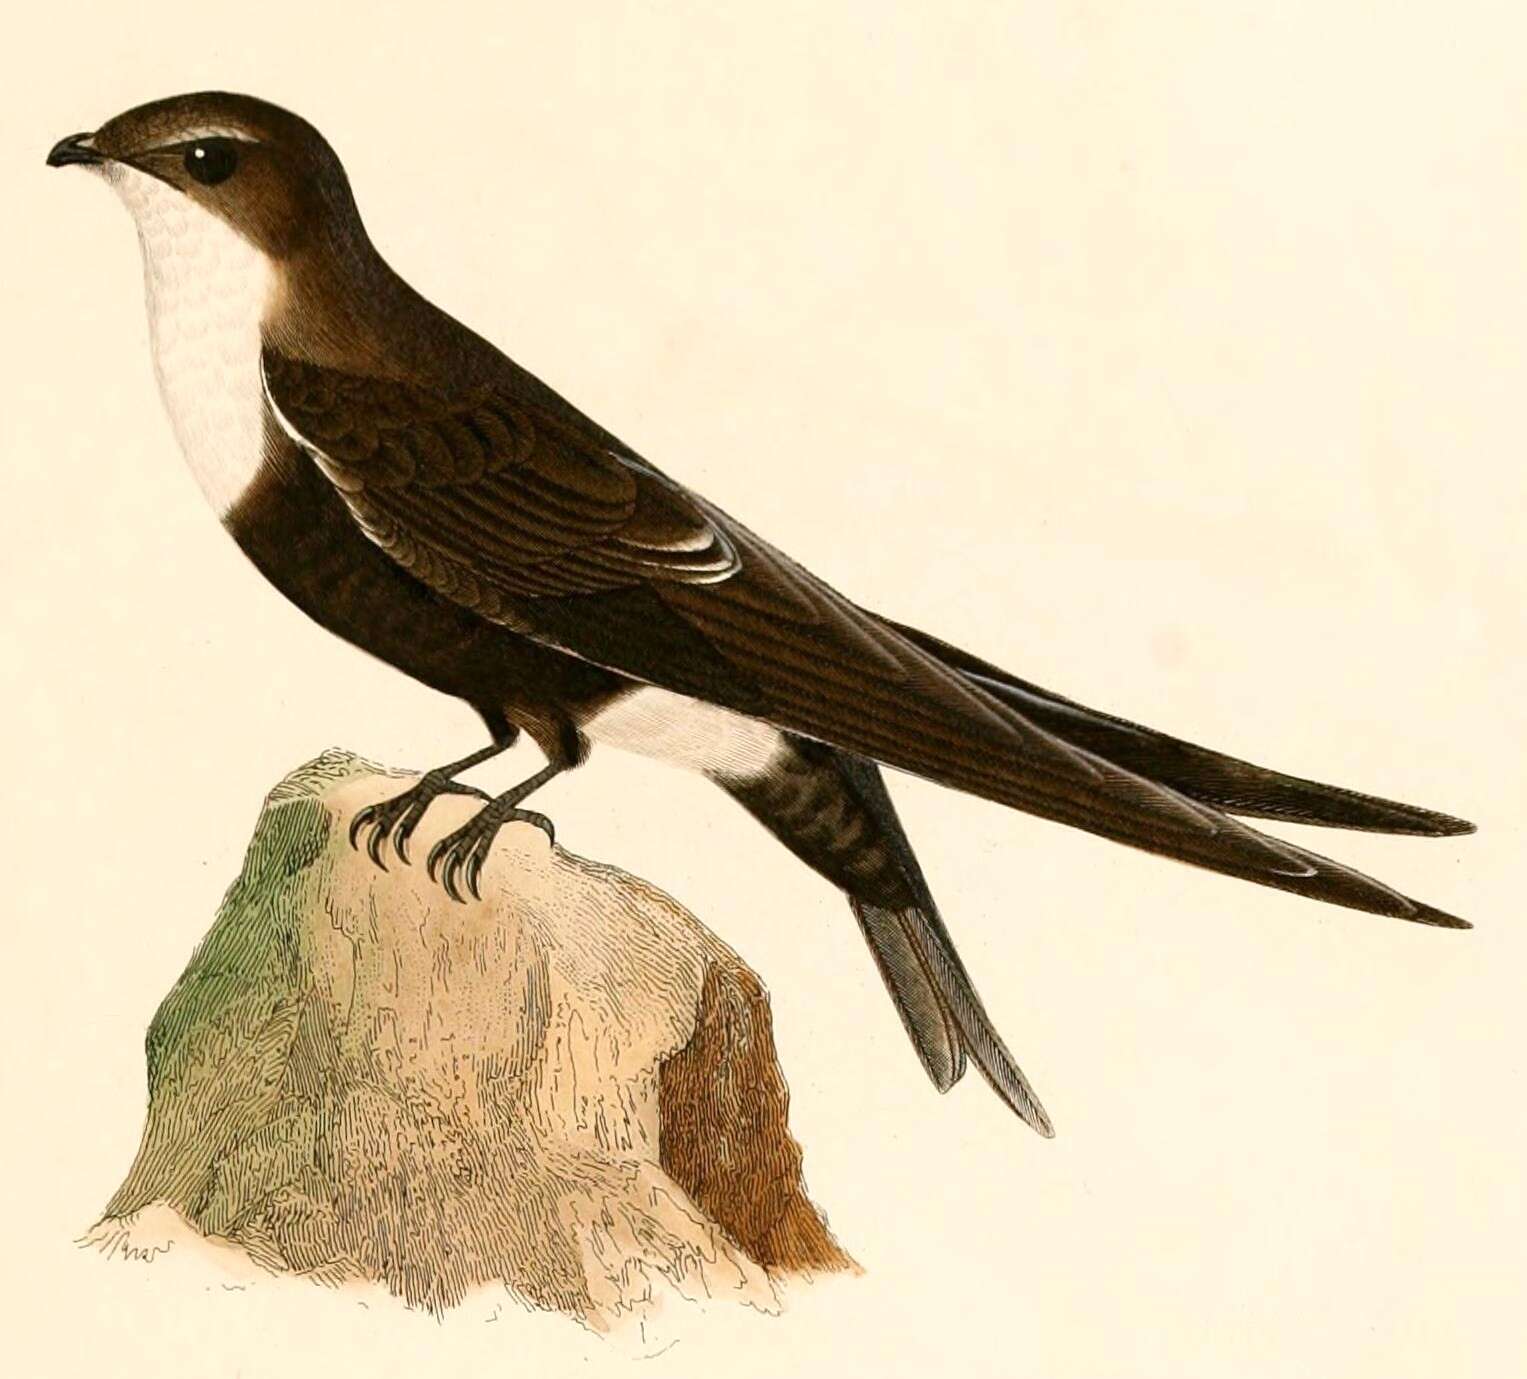 Image of White-tipped Swift